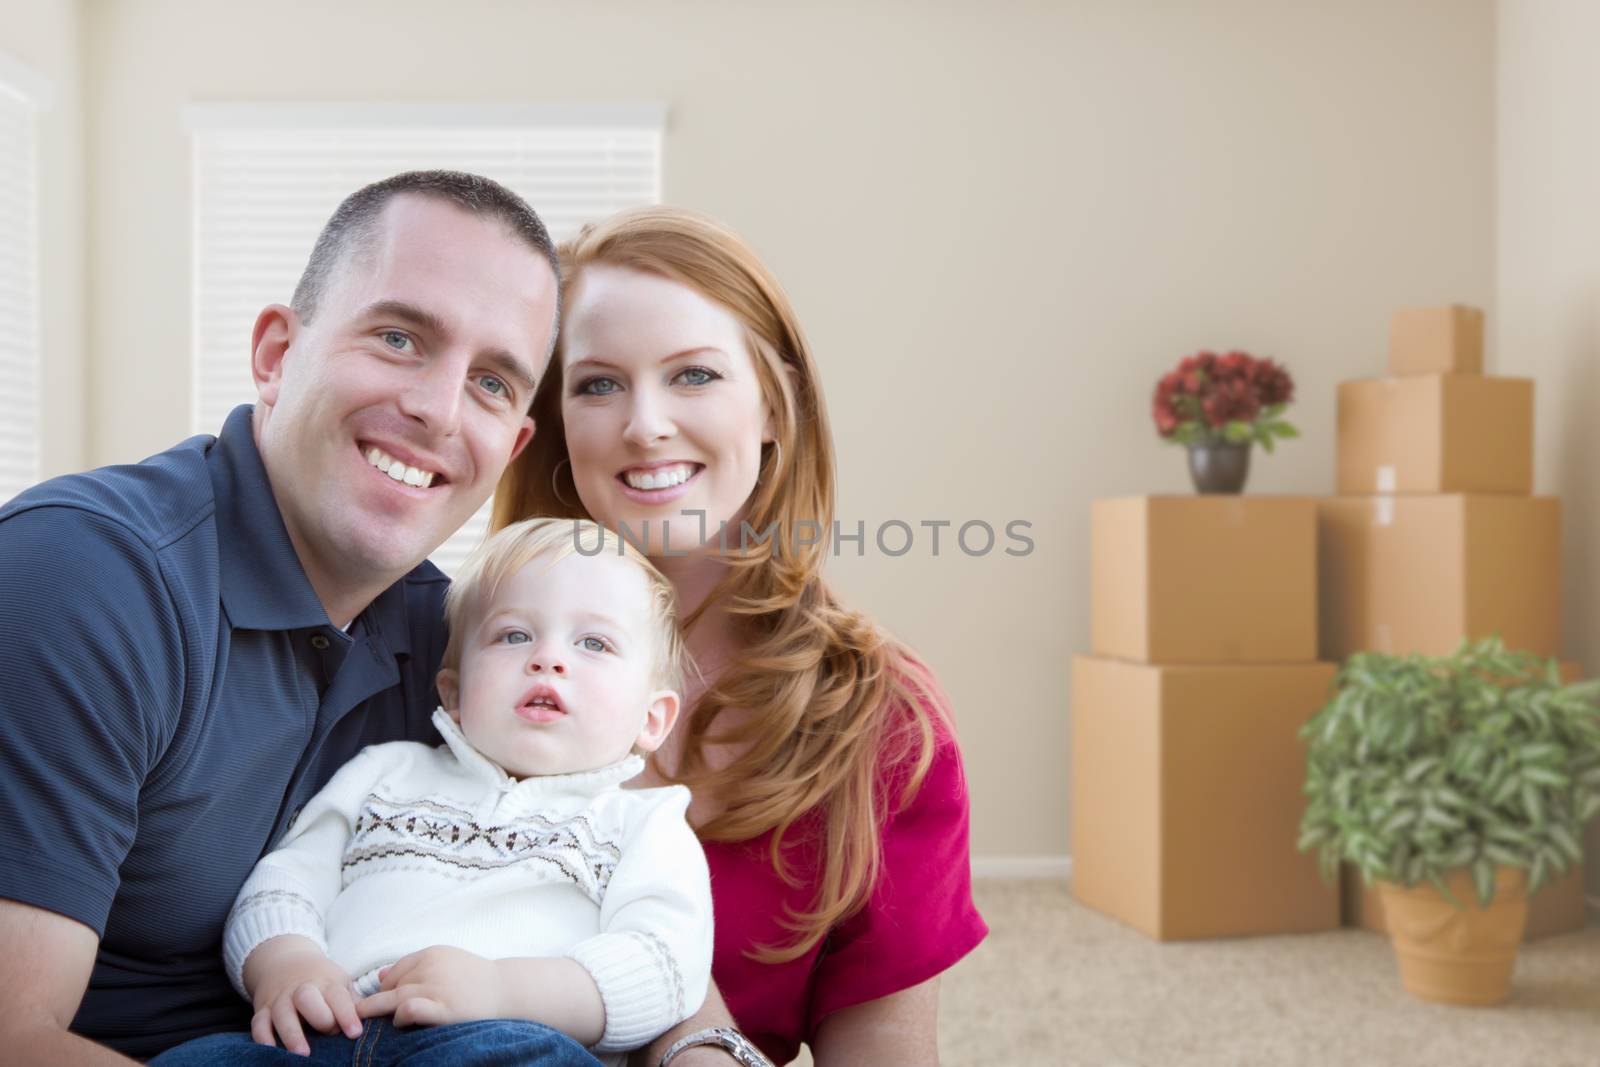 Young Military Family in Empty Room with Packed Boxes by Feverpitched